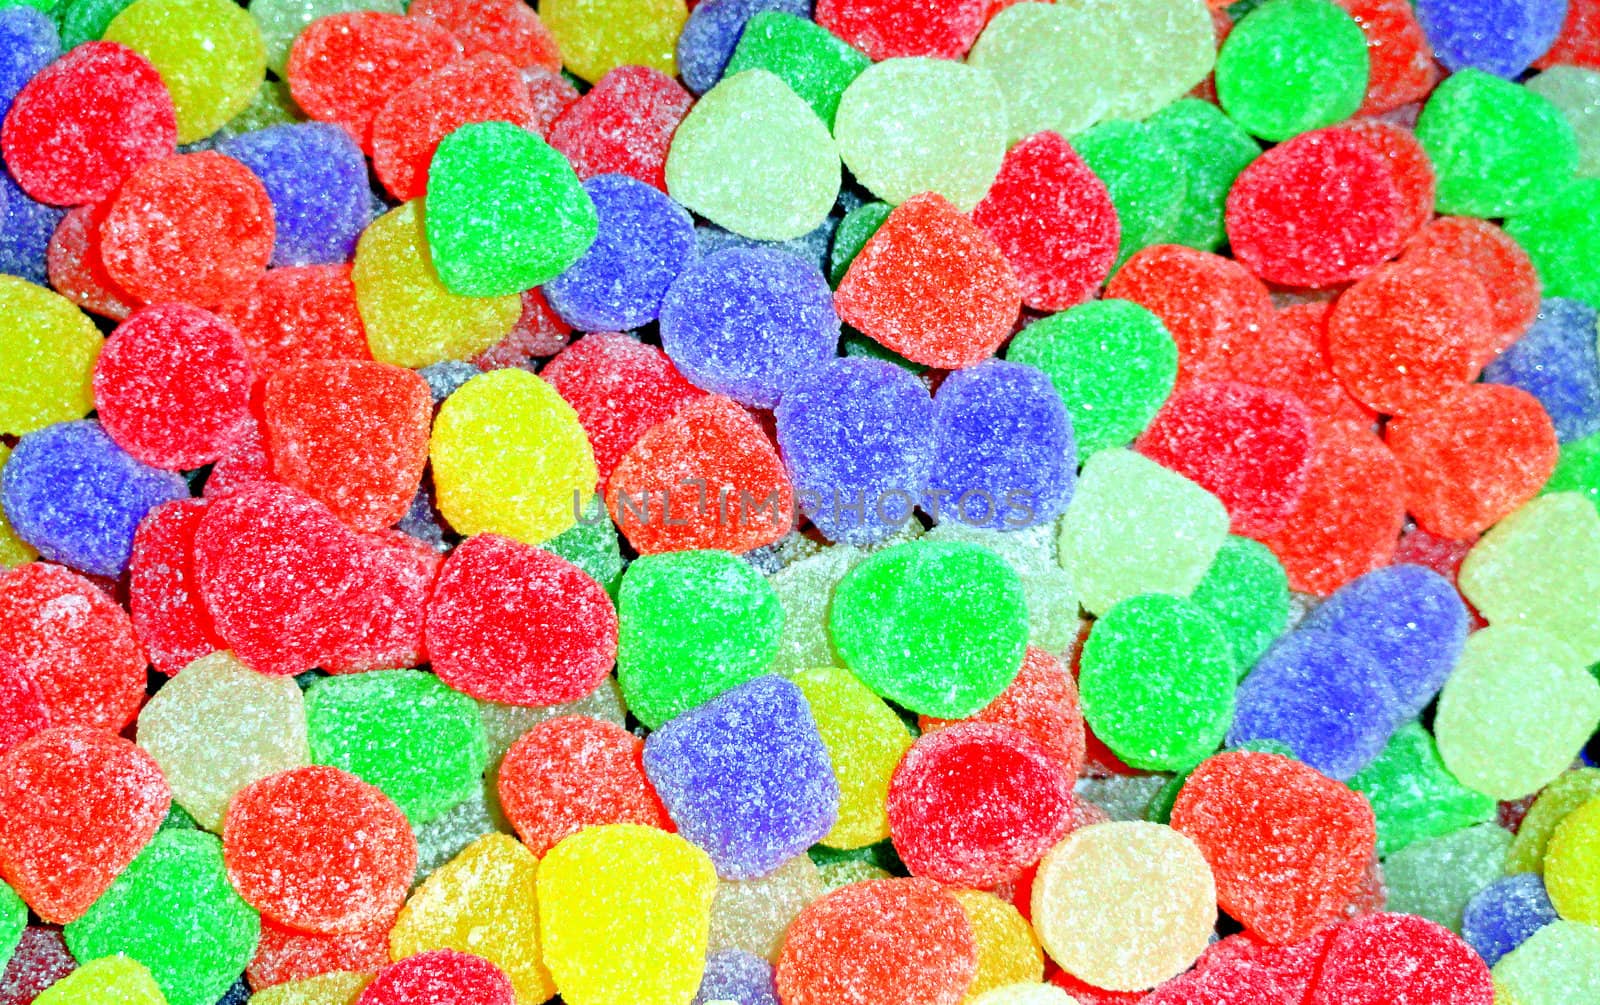 Colorful gumdrops in a bowl.